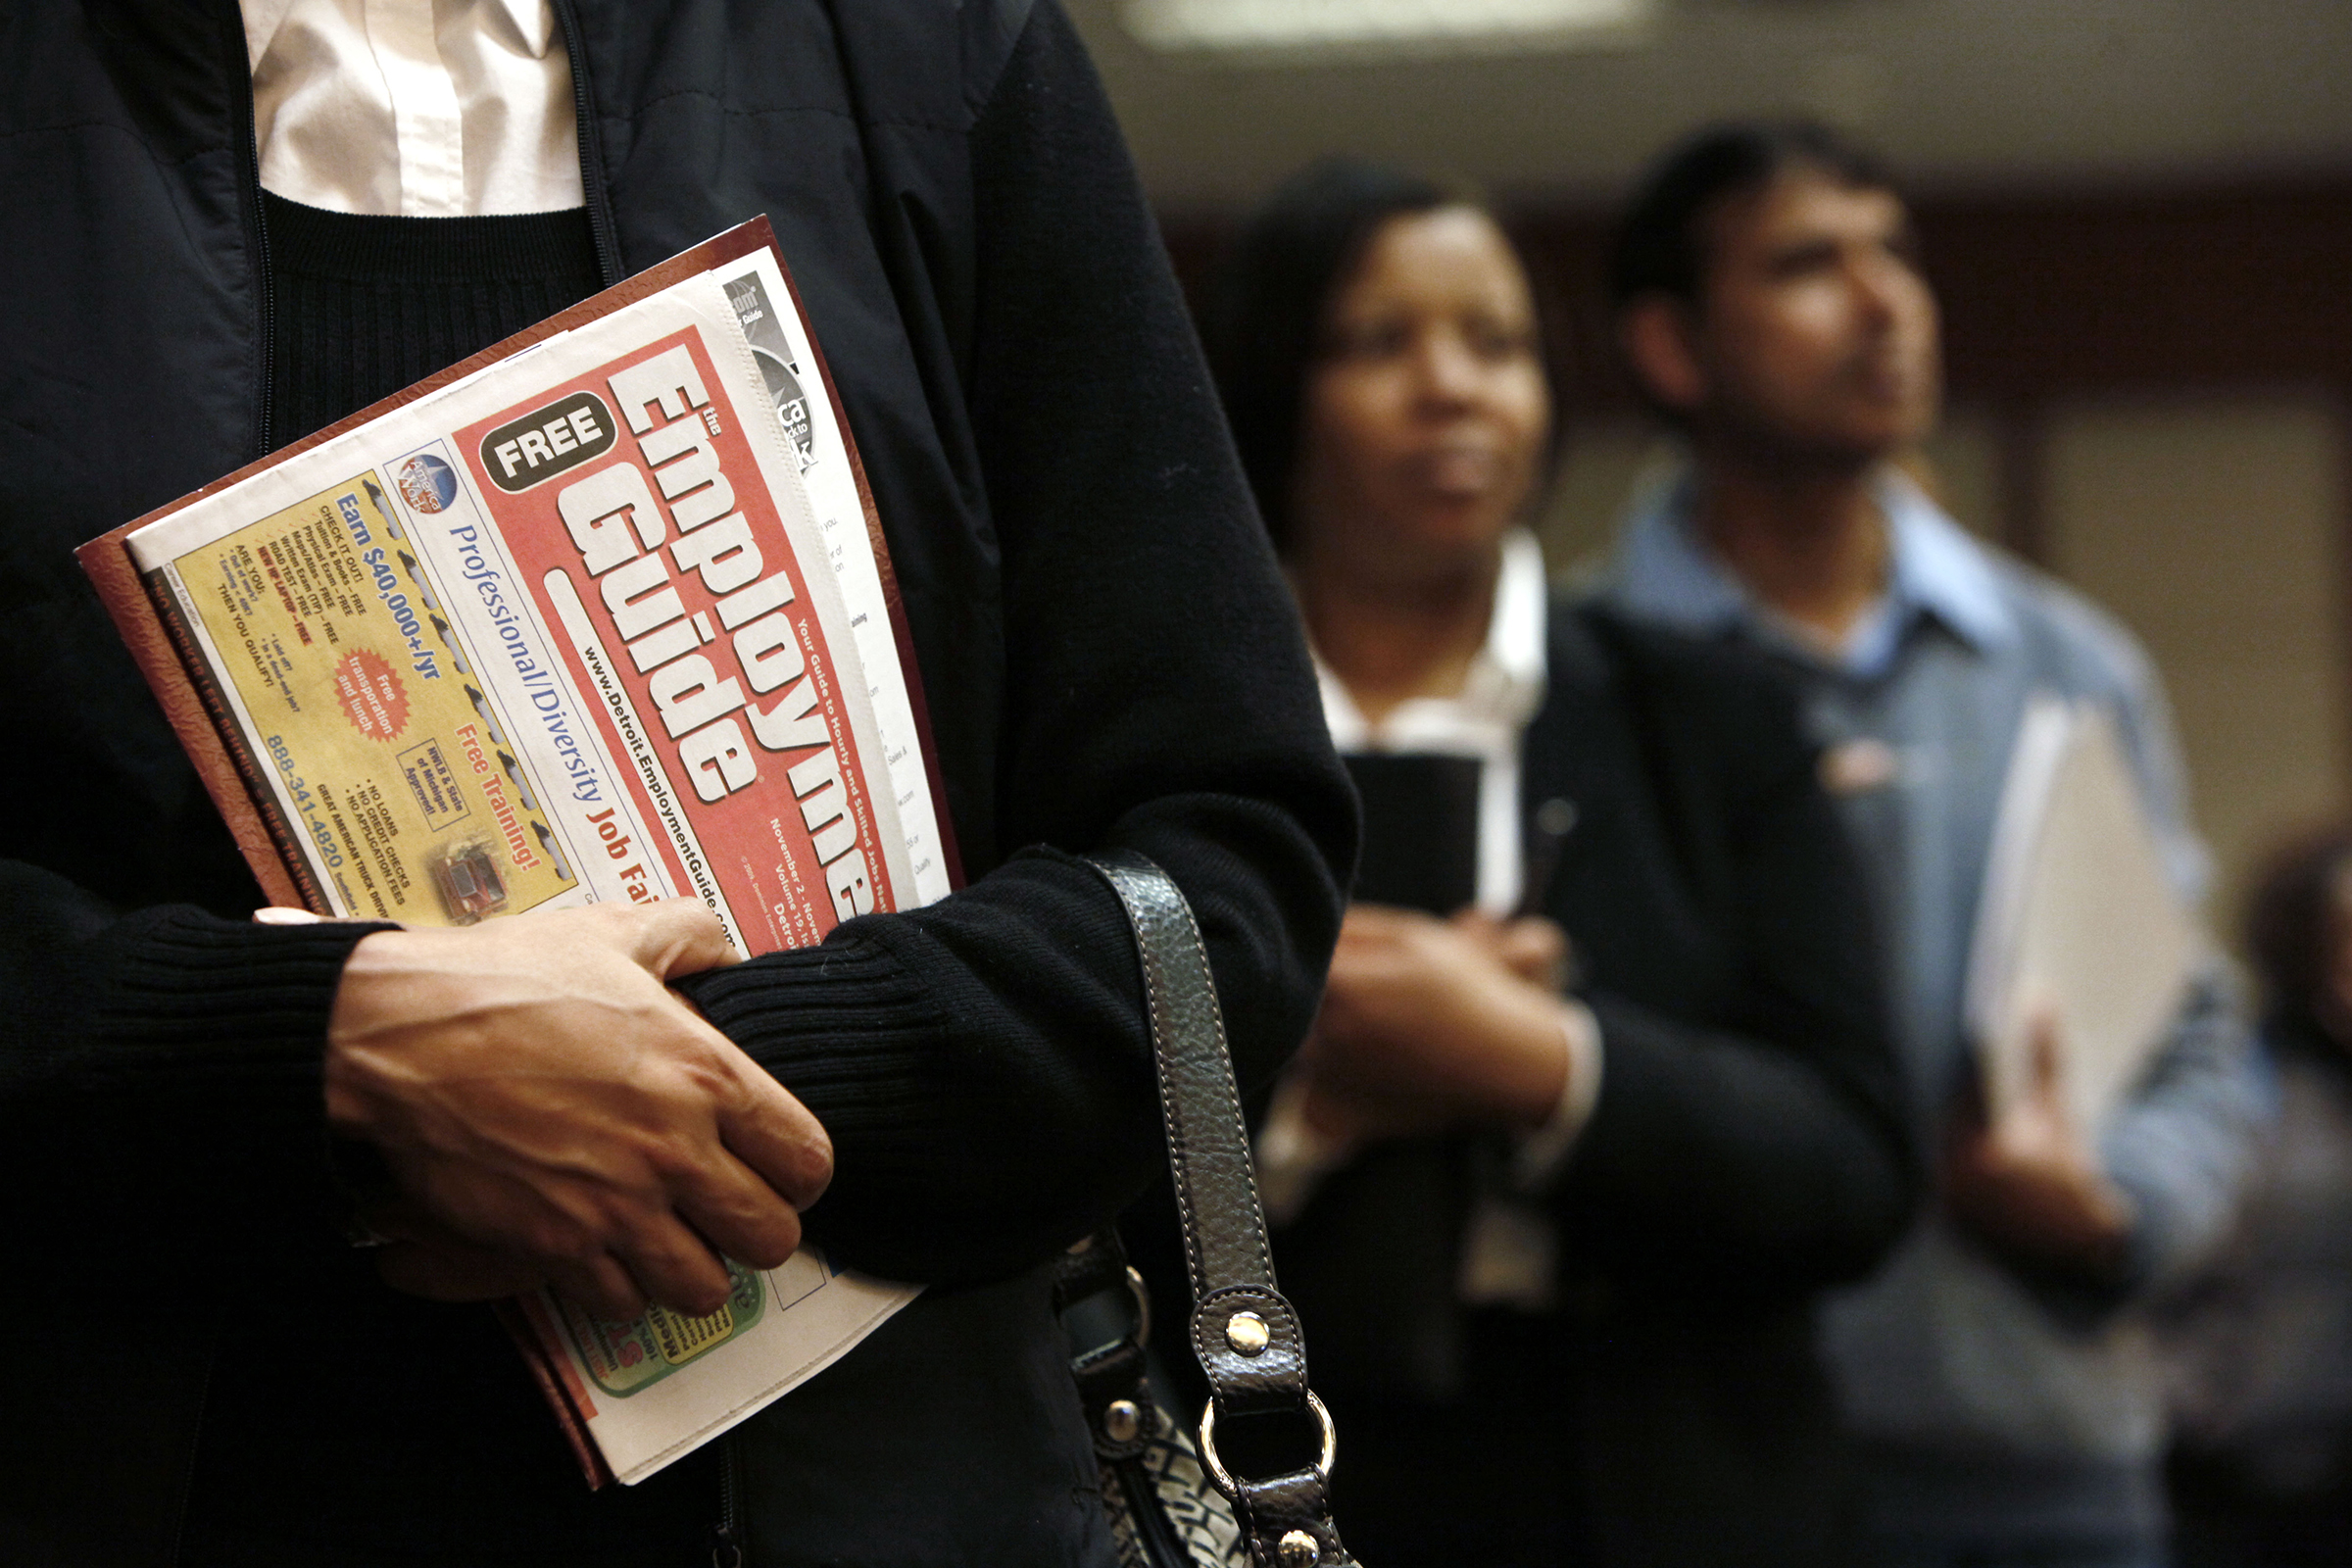 A woman holds an employment guide standing in line while attending a job fair in Livonia, Michigan, on Nov. 4, 2009. (Paul Sancya—AP)